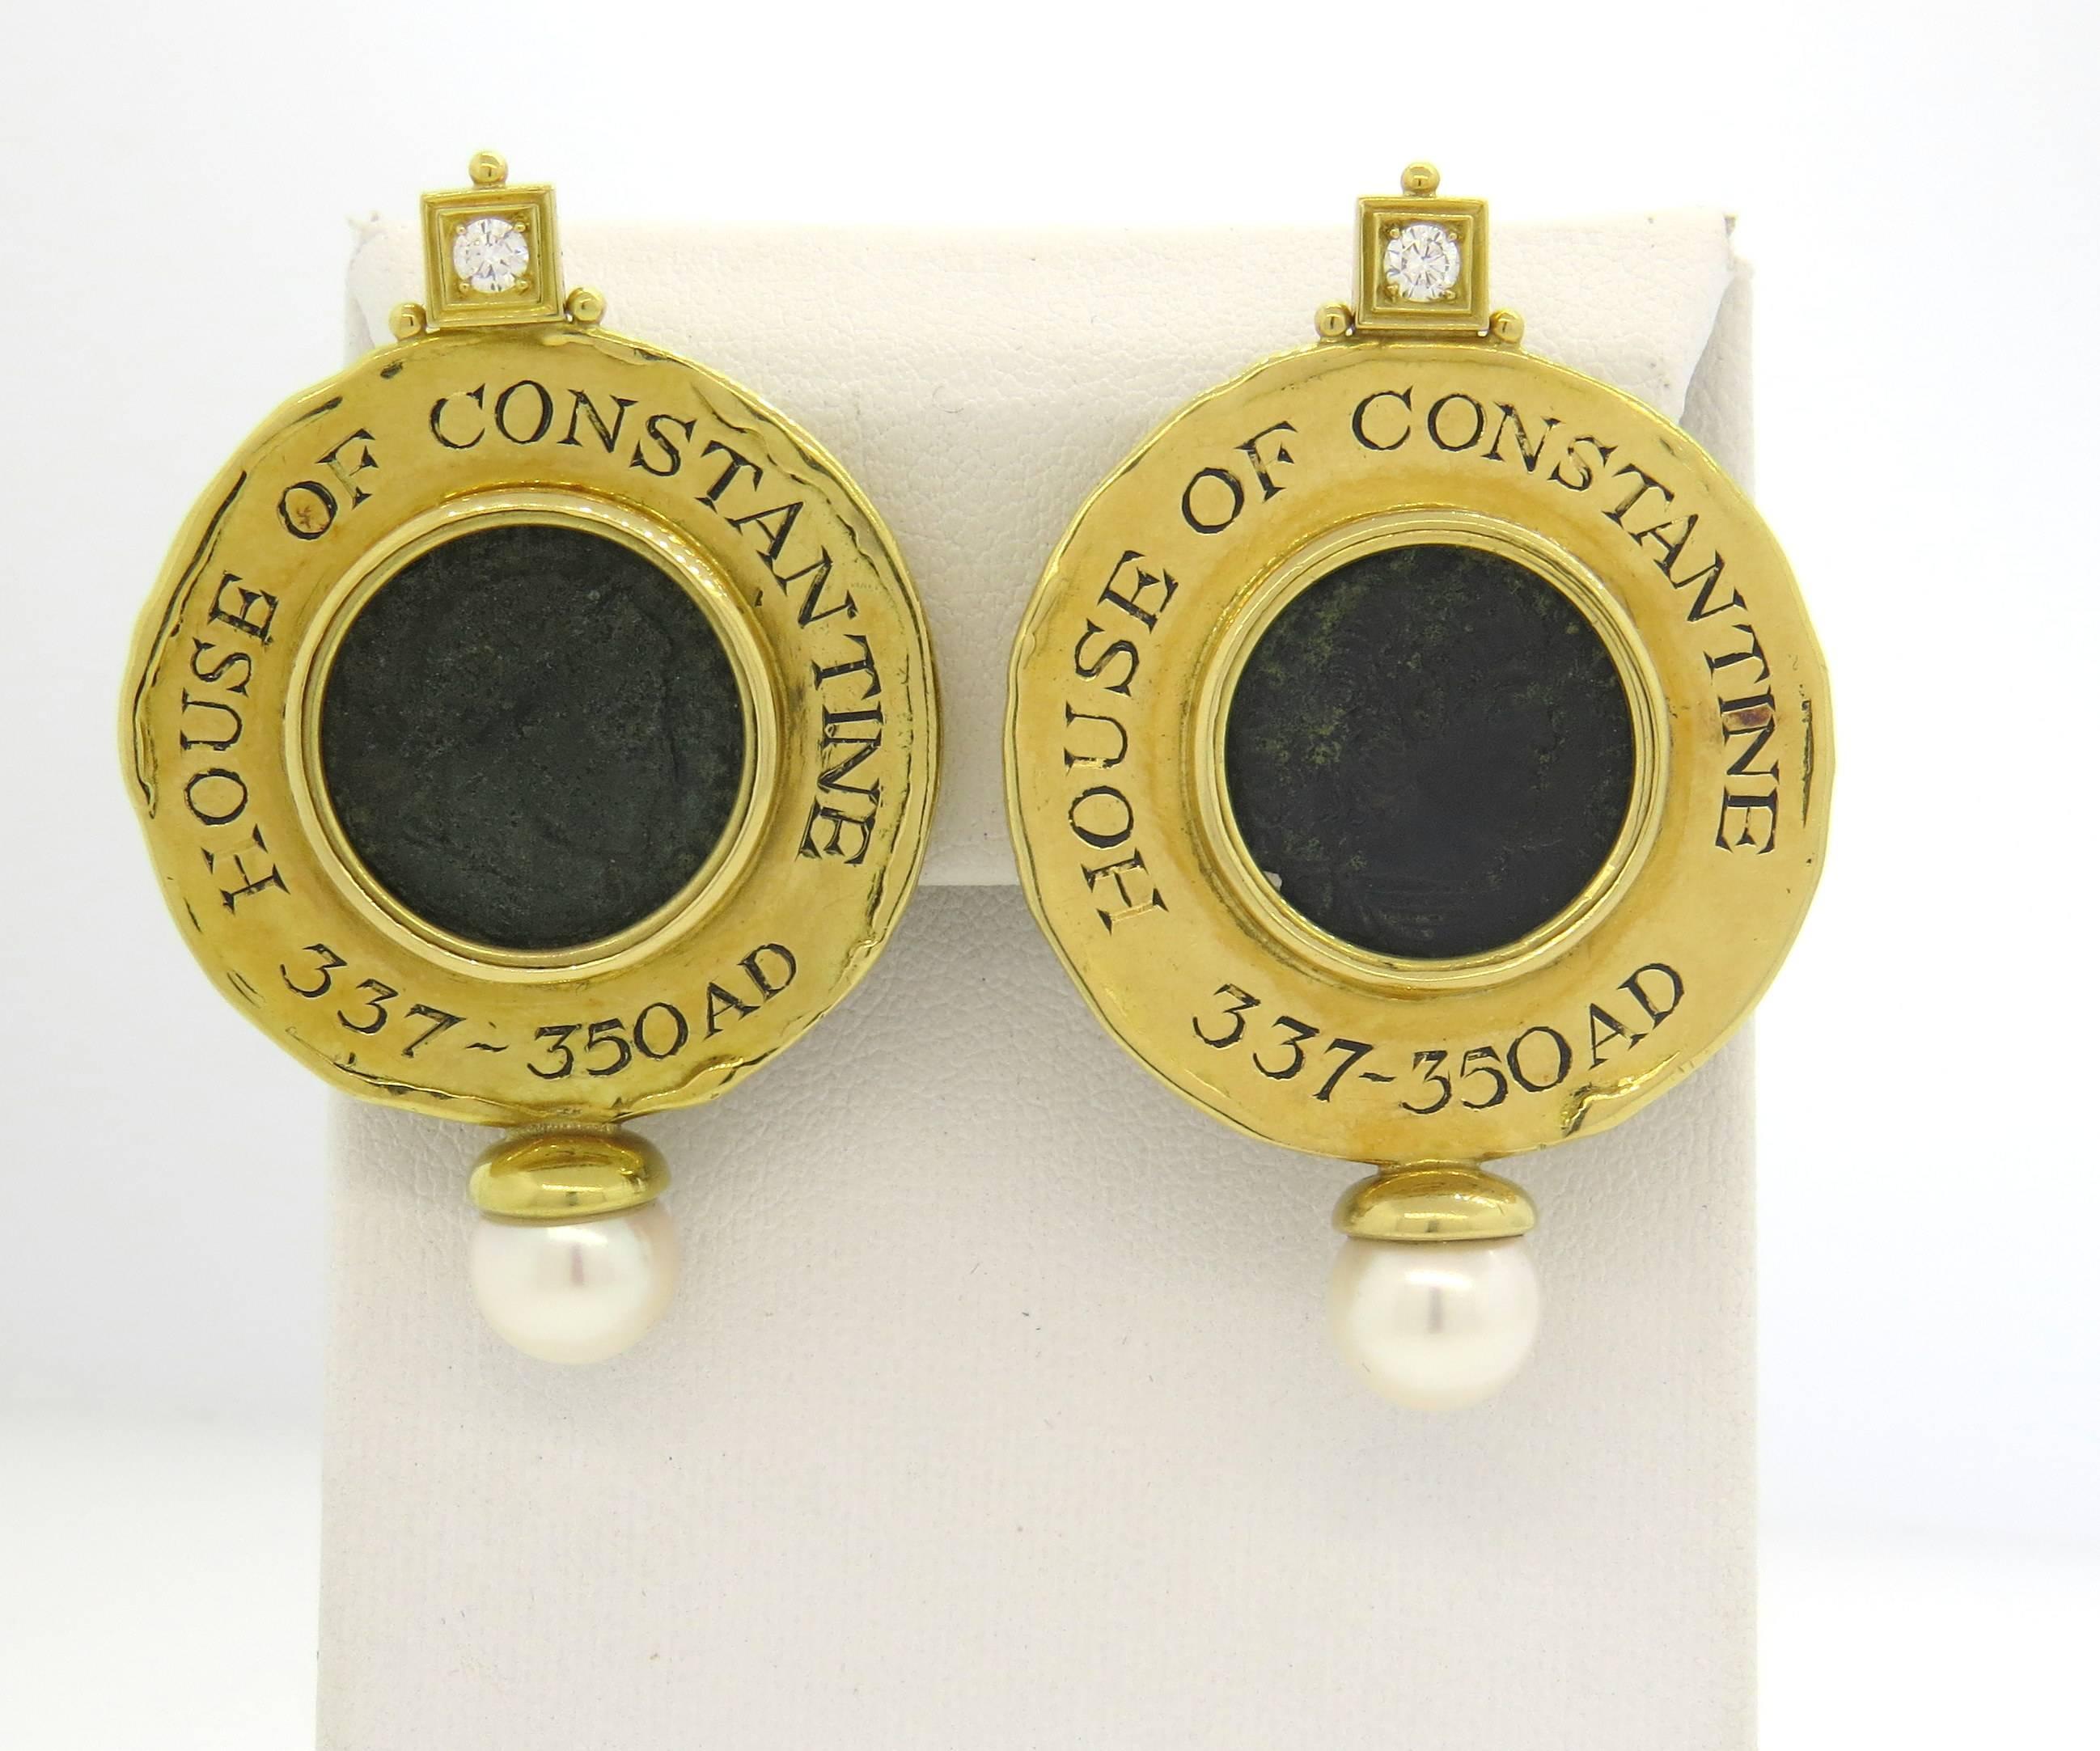 Large 18k yellow gold earrings, crafted by Elizabeth Gage, decorated with 17mm ancient coin in the center, 8.8mm pearls and 0.10ct G/VS diamond each. Earrings are 50mm long x 33mm wide. Marked Gage, English gold marks, House of Constantine 337-350